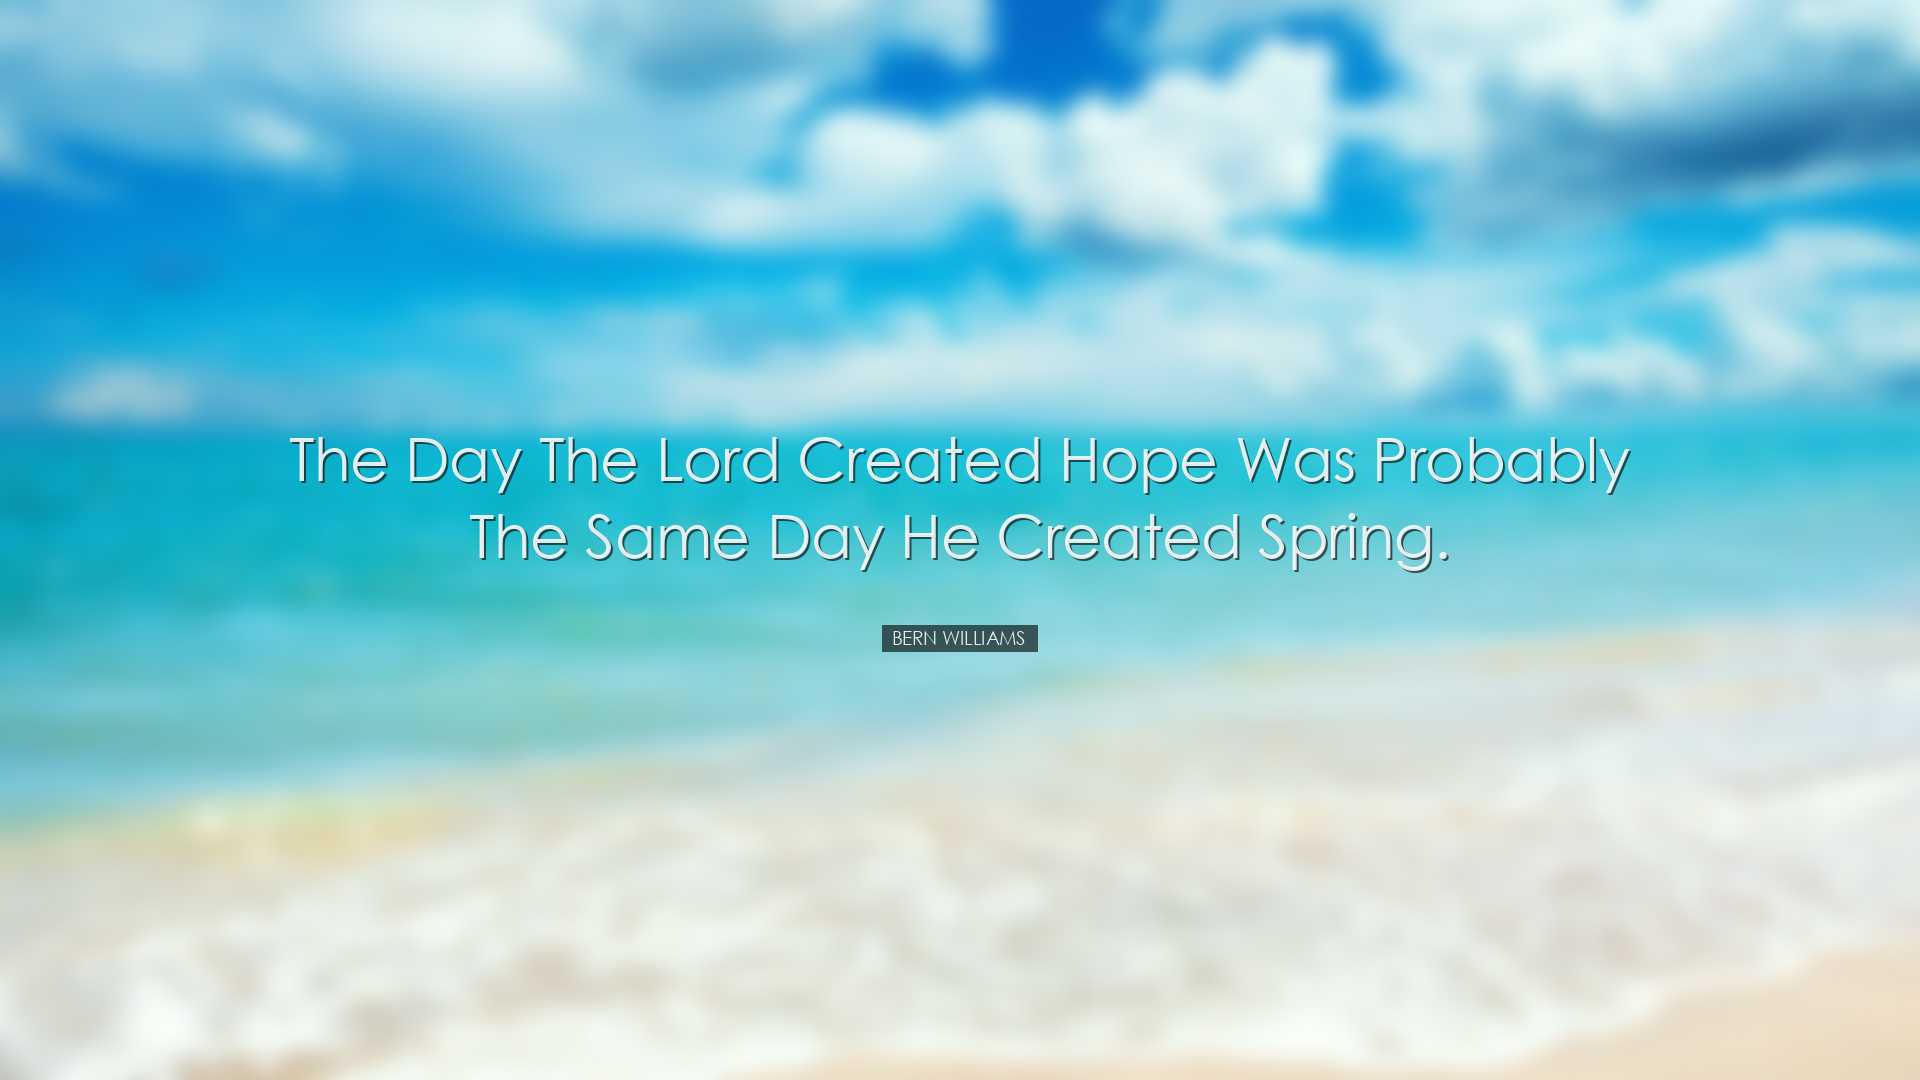 The day the Lord created hope was probably the same day he created